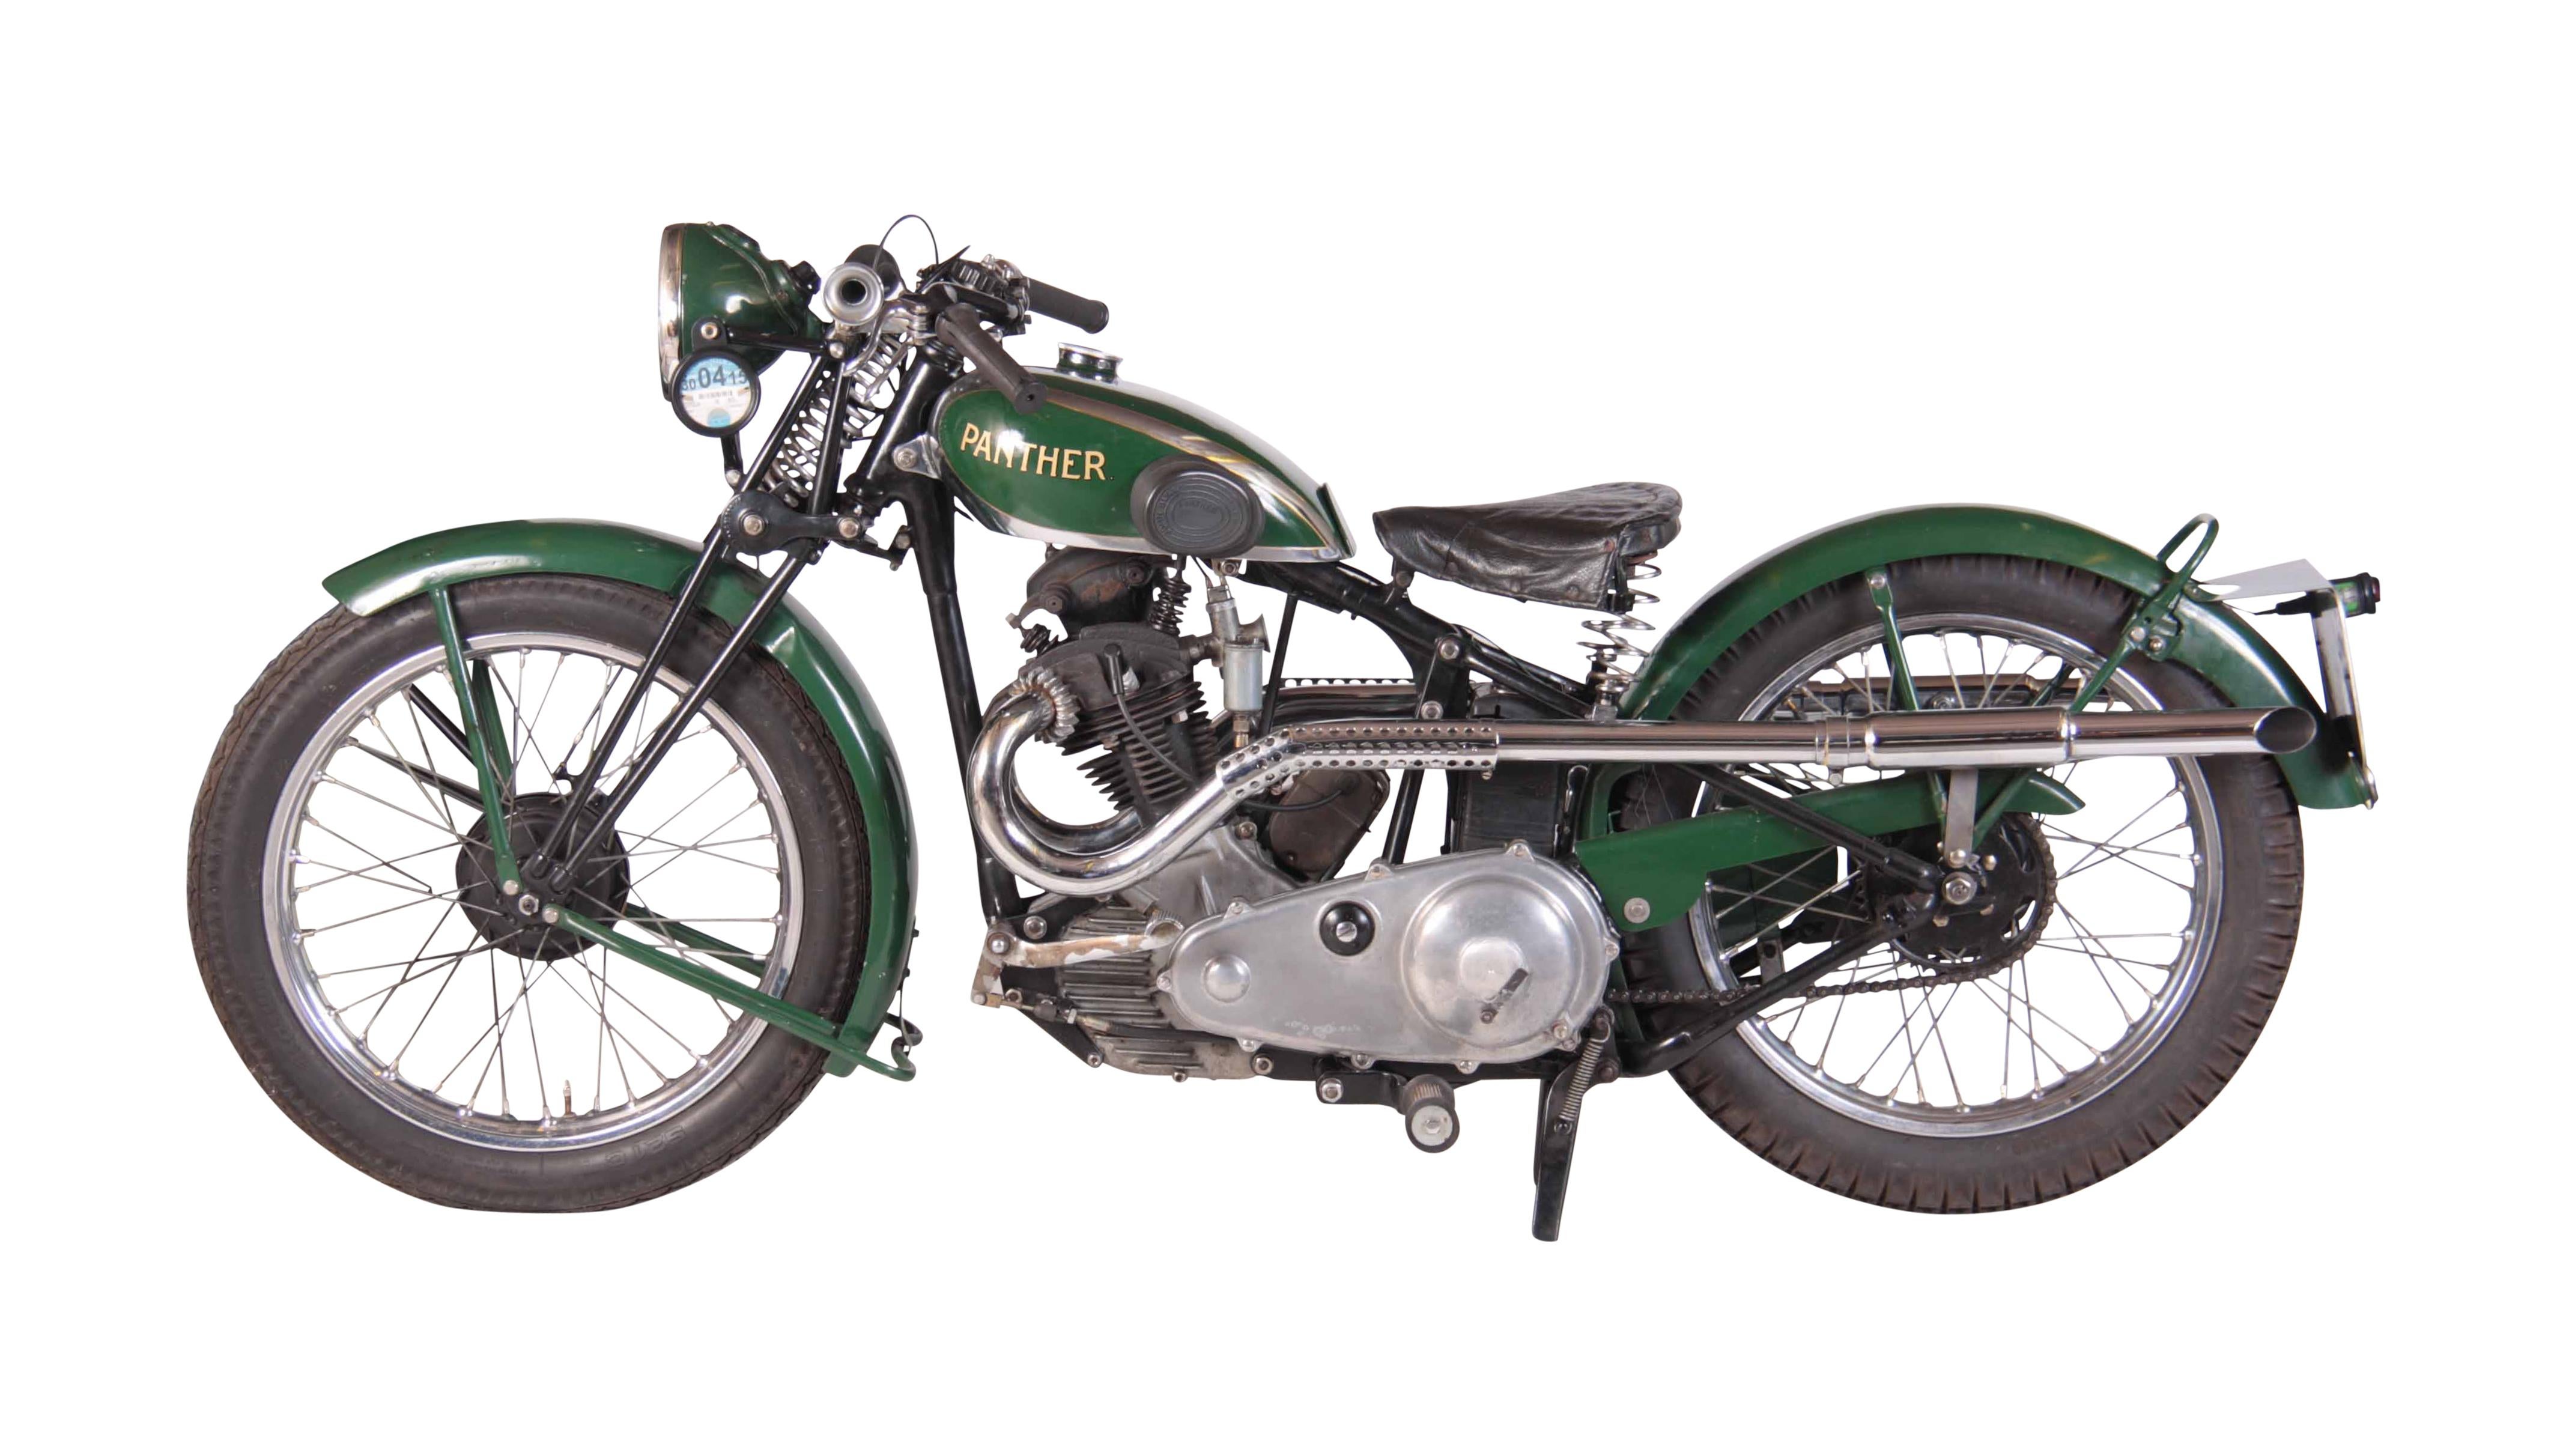 1932 Phelon and Moore Panther motorcycle.
A rare 1932 rigid framed 'sloper' 250cc Panther motorcycle. The last owner acquired the bike in 1983. It is a simple and robust machine which inspires enormous enthusiasm from its owners. It is a great